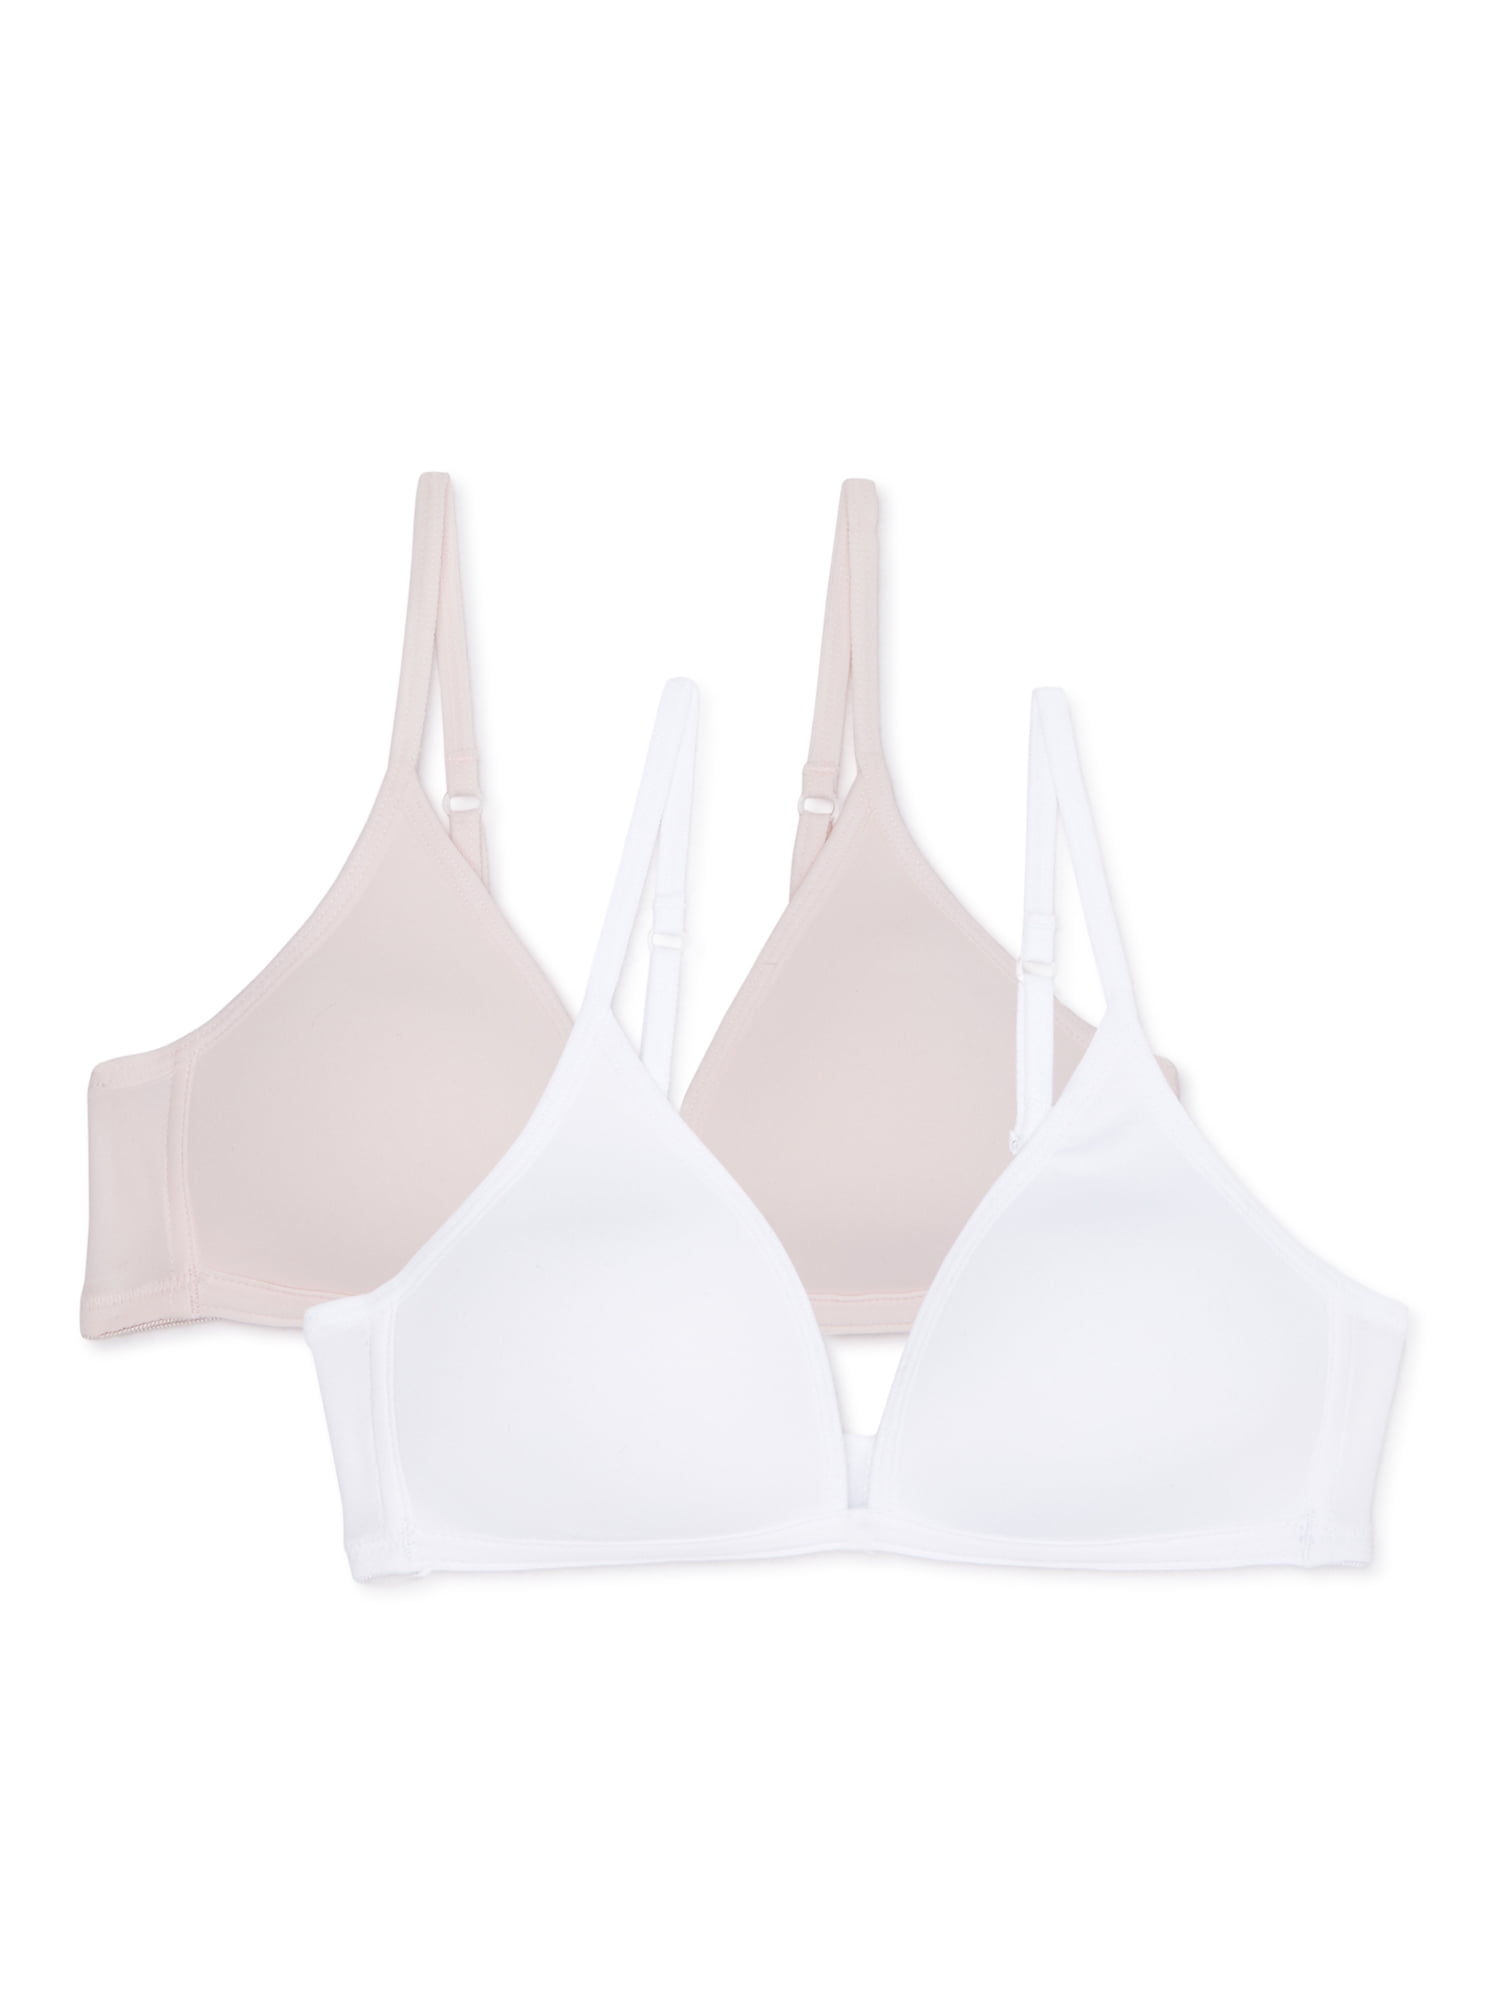 Maidenform Big Girls' Underwire Training Bra (Pack of 2), Nude/White, 32A,  price tracker / tracking,  price history charts,  price  watches,  price drop alerts